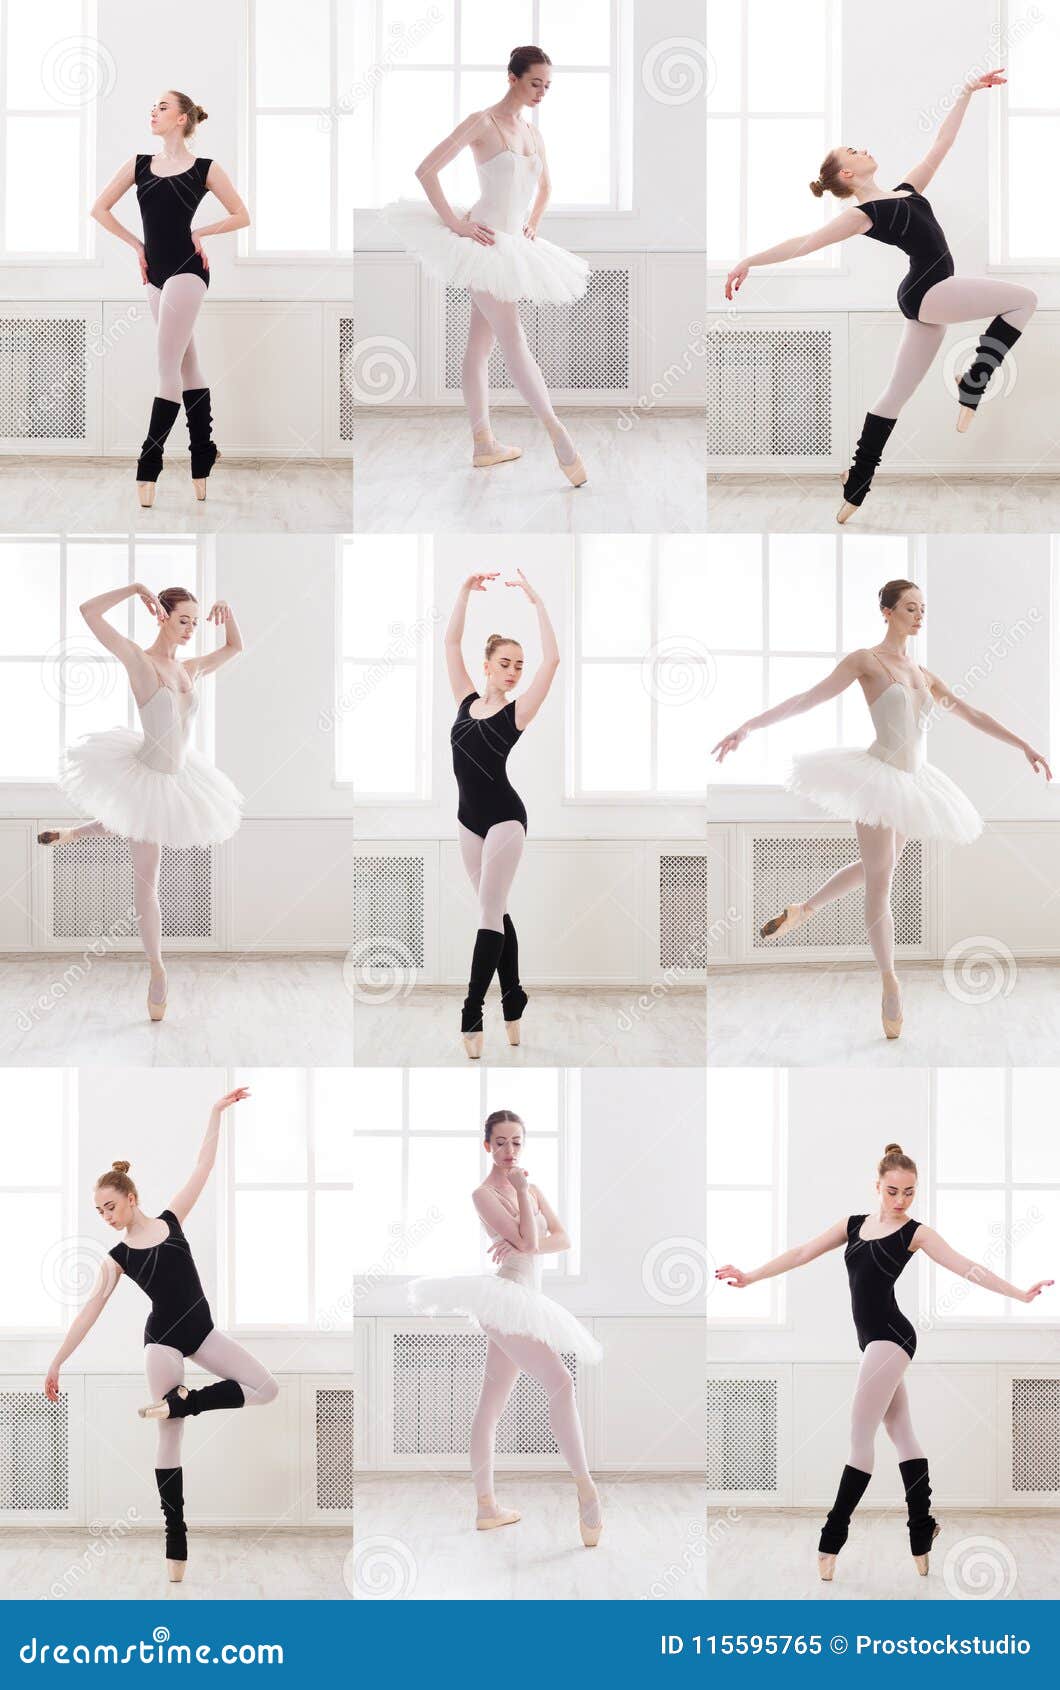 Ballerina In Different Ballet Poses. Vector Illustration Isolated On White  Background. Royalty Free SVG, Cliparts, Vectors, and Stock Illustration.  Image 97849112.